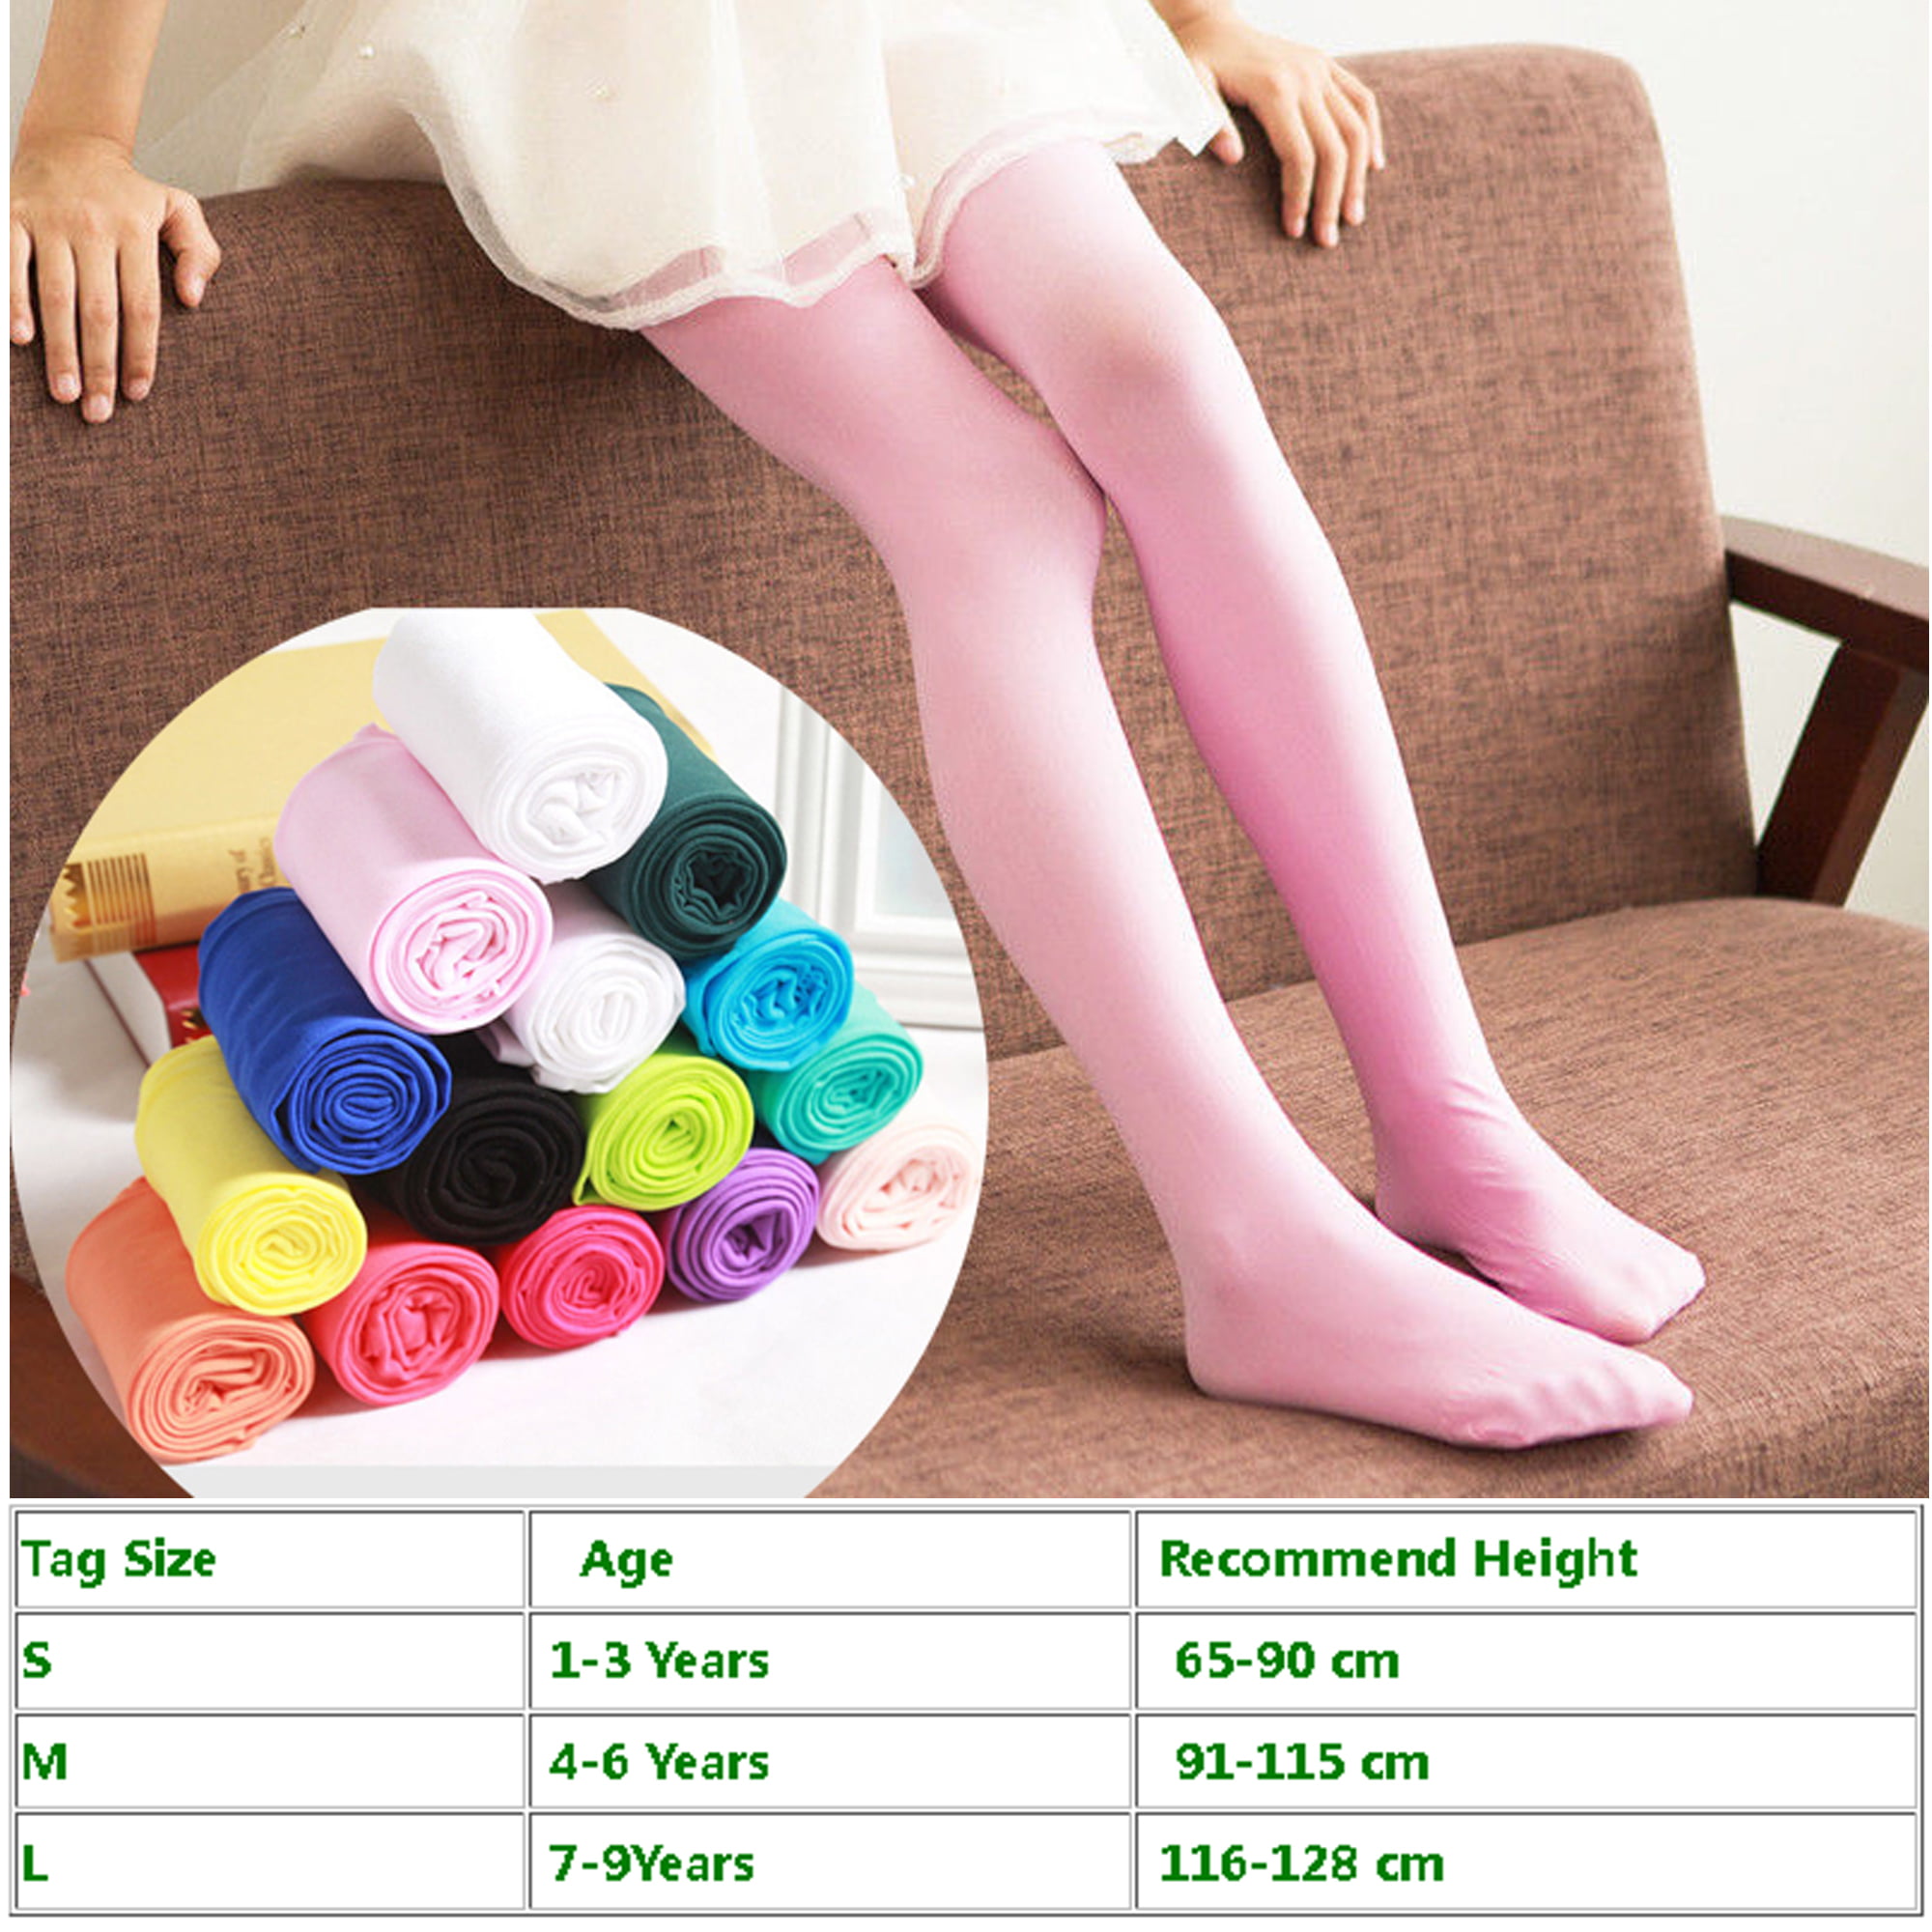 Colorful Velvet Ballet Stockings For Girls Solid Pantyhose Tights And Dance  Socks Over Leggings For Kids From Topwholesalerno1, $1.41